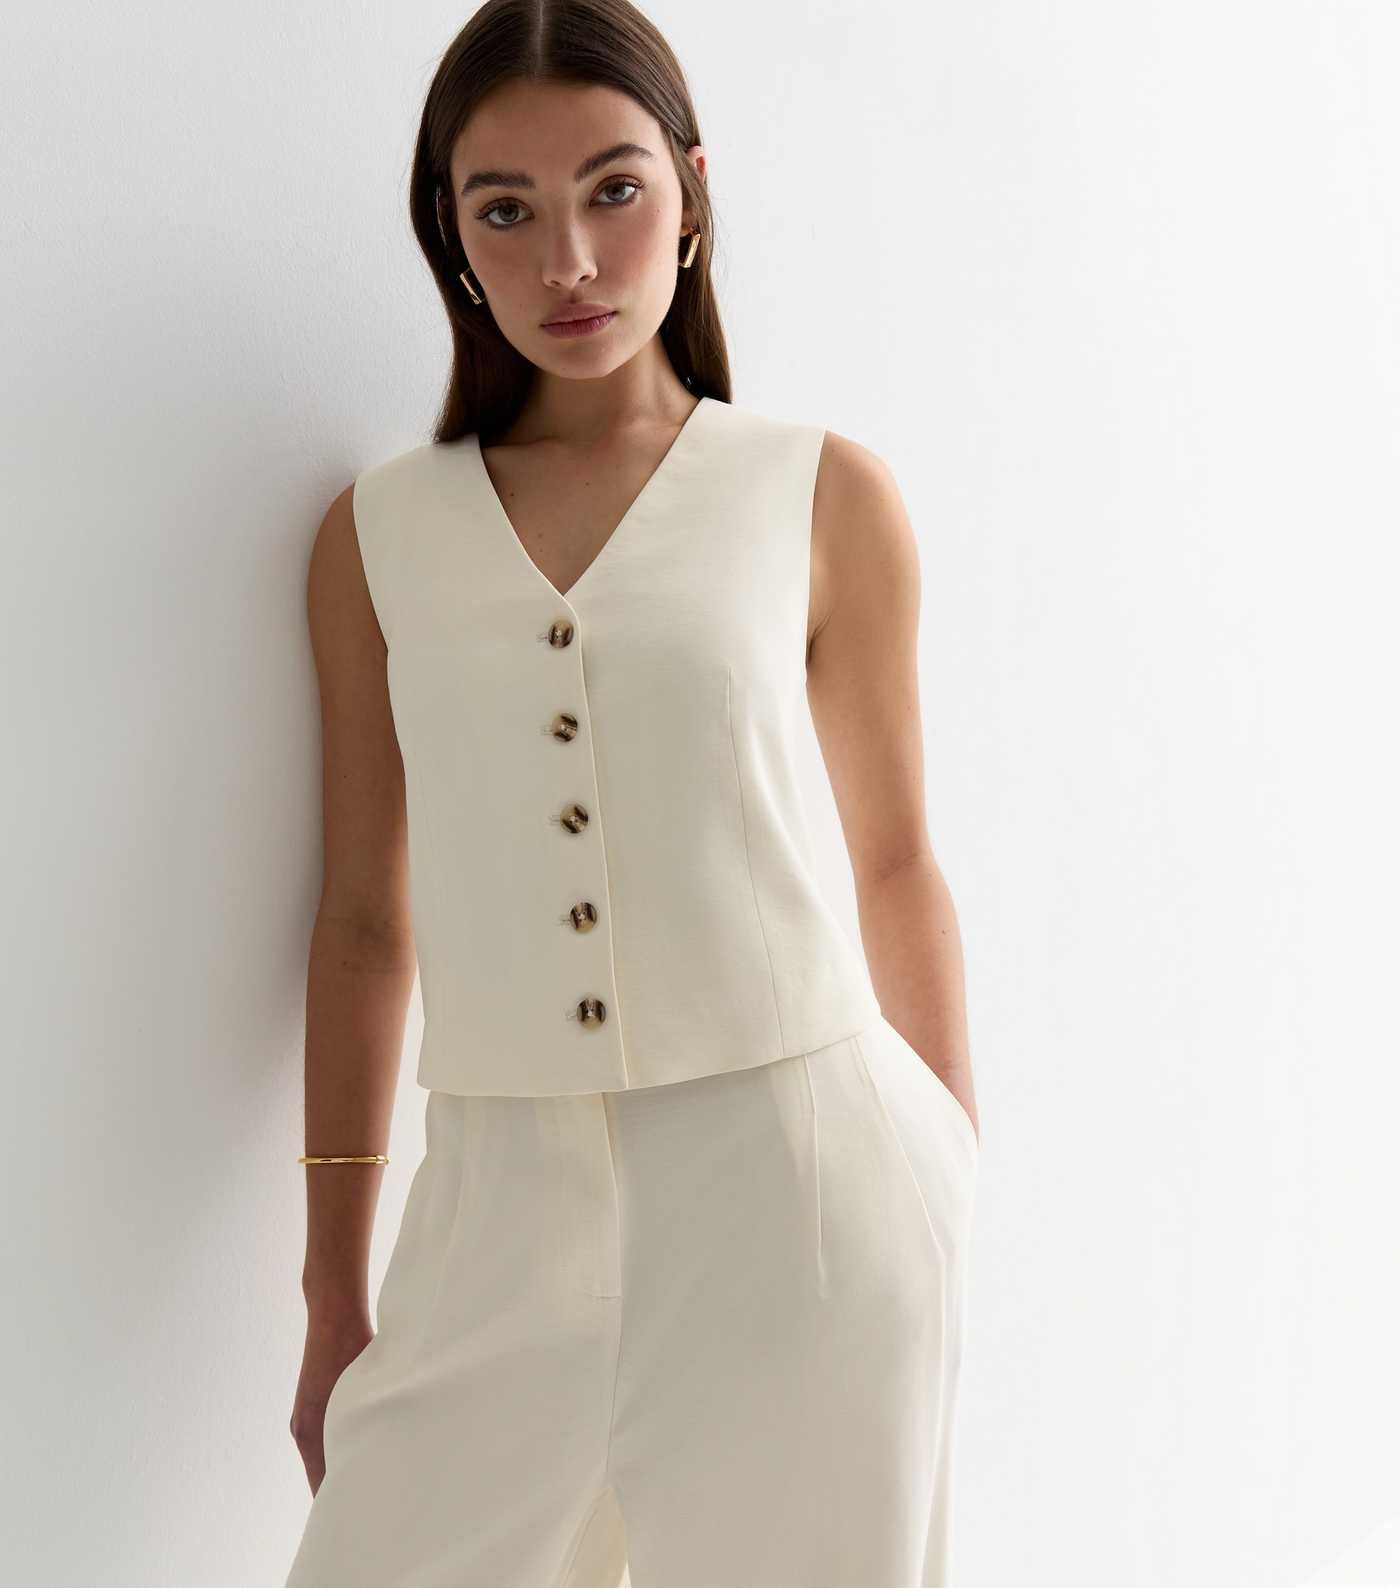 Cream Button Front Waistcoat
						
						Add to Saved Items
						Remove from Saved Items | New Look (UK)